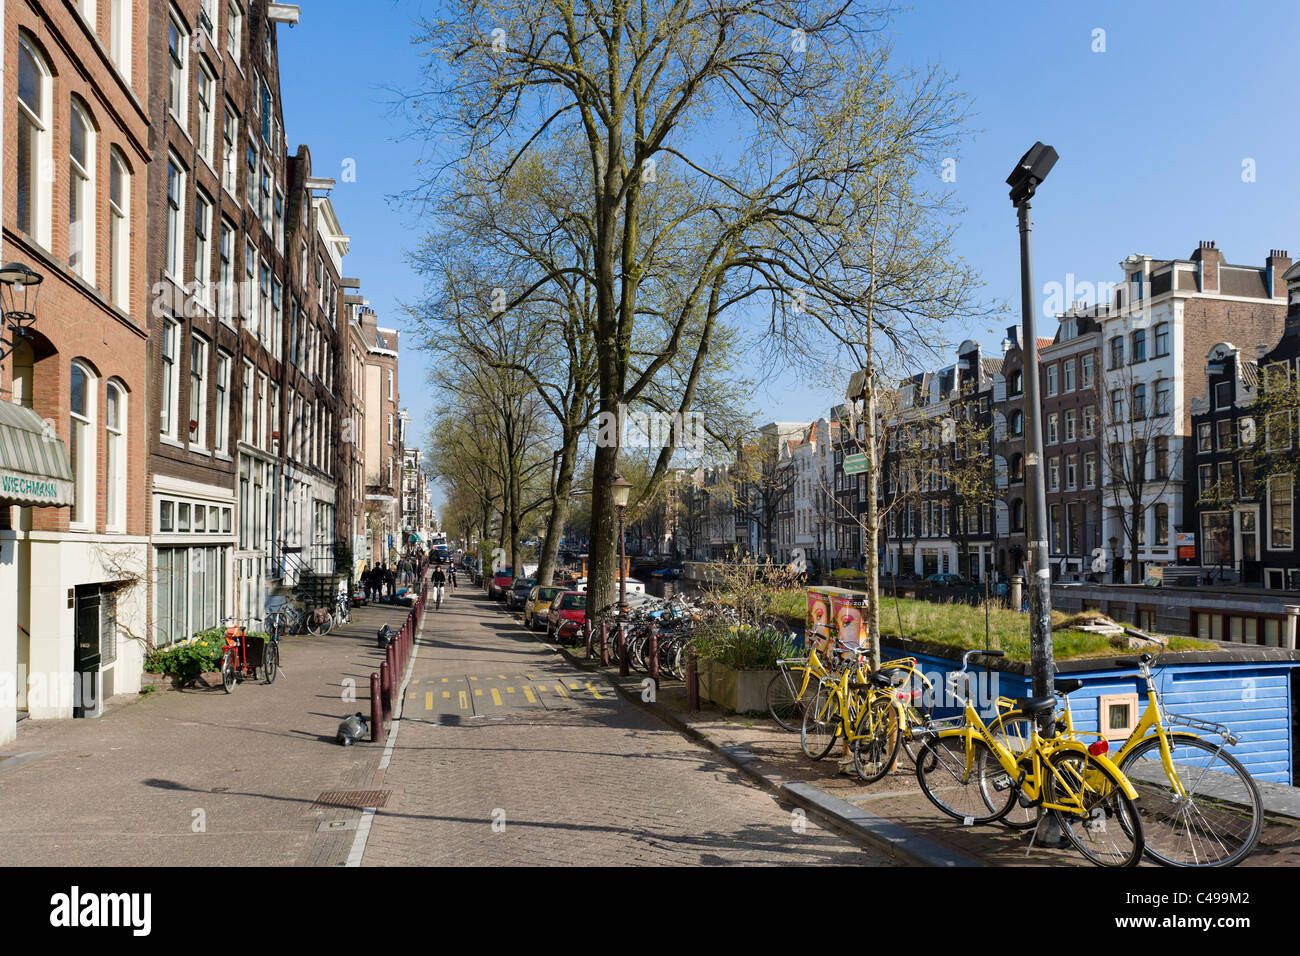 The Prinsengracht canal near the junction with Looiersgracht, Grachtengordel, Amsterdam, Netherlands Stock Photo